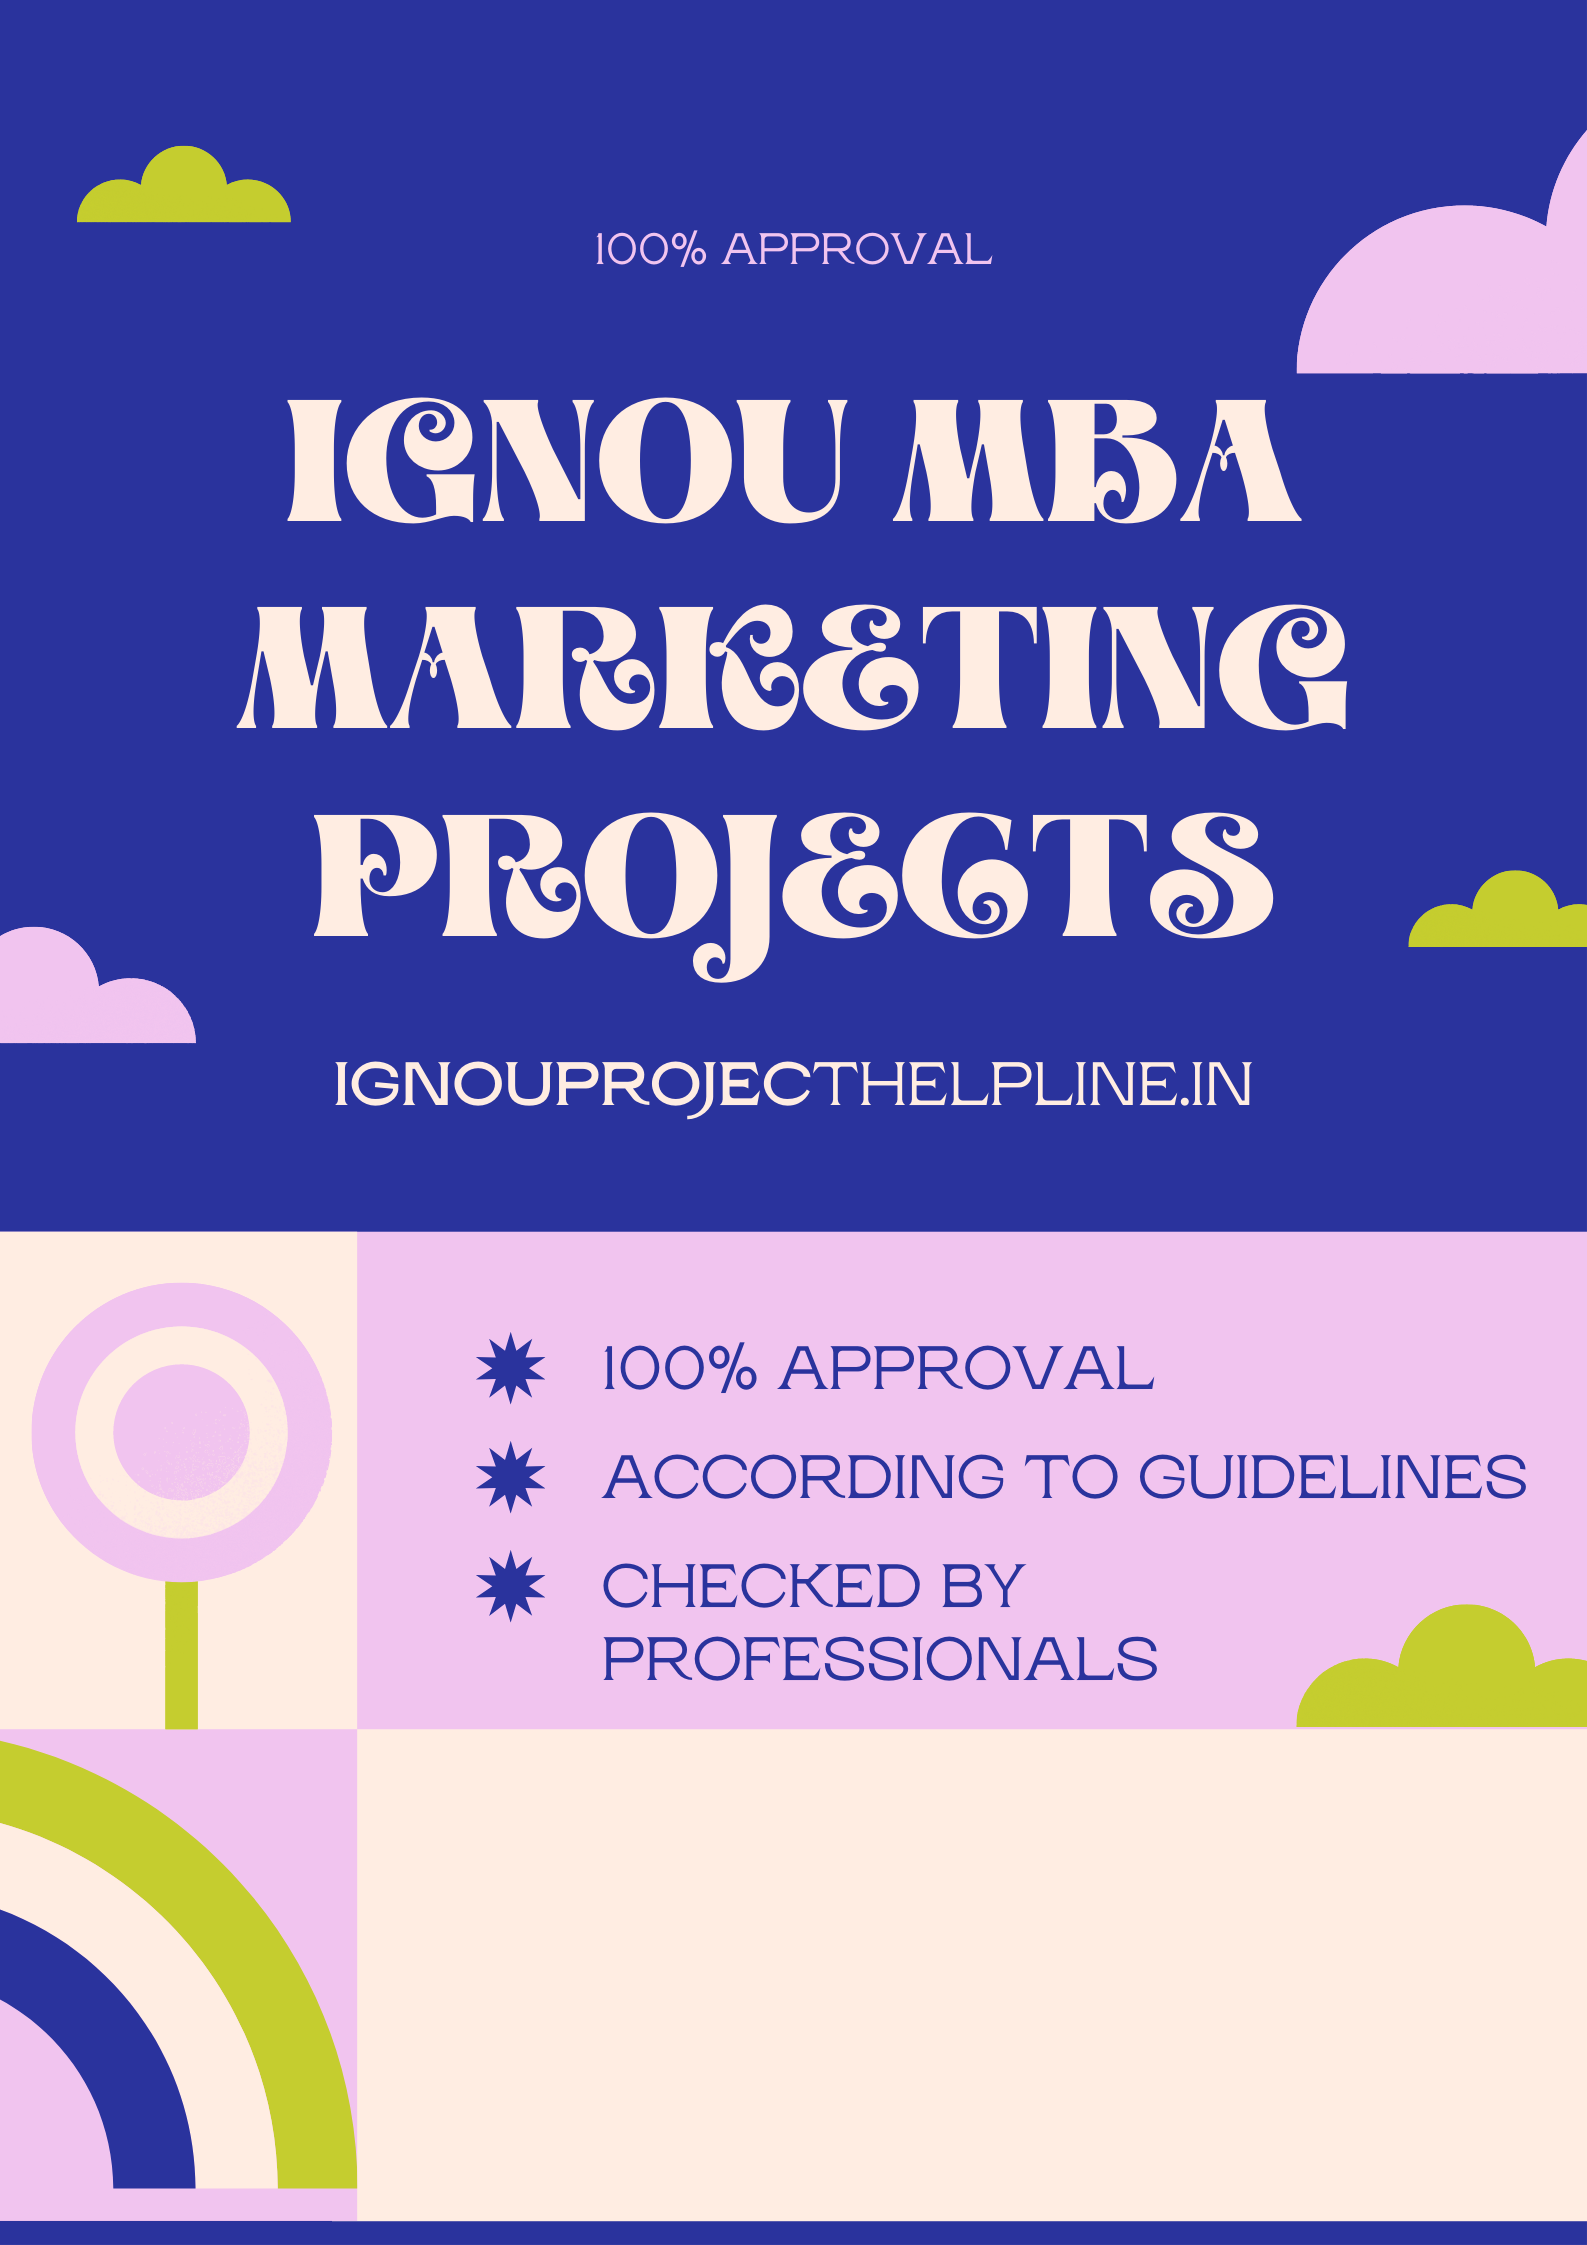 IGNOU MARKETING PROJECT SYNOPSIS